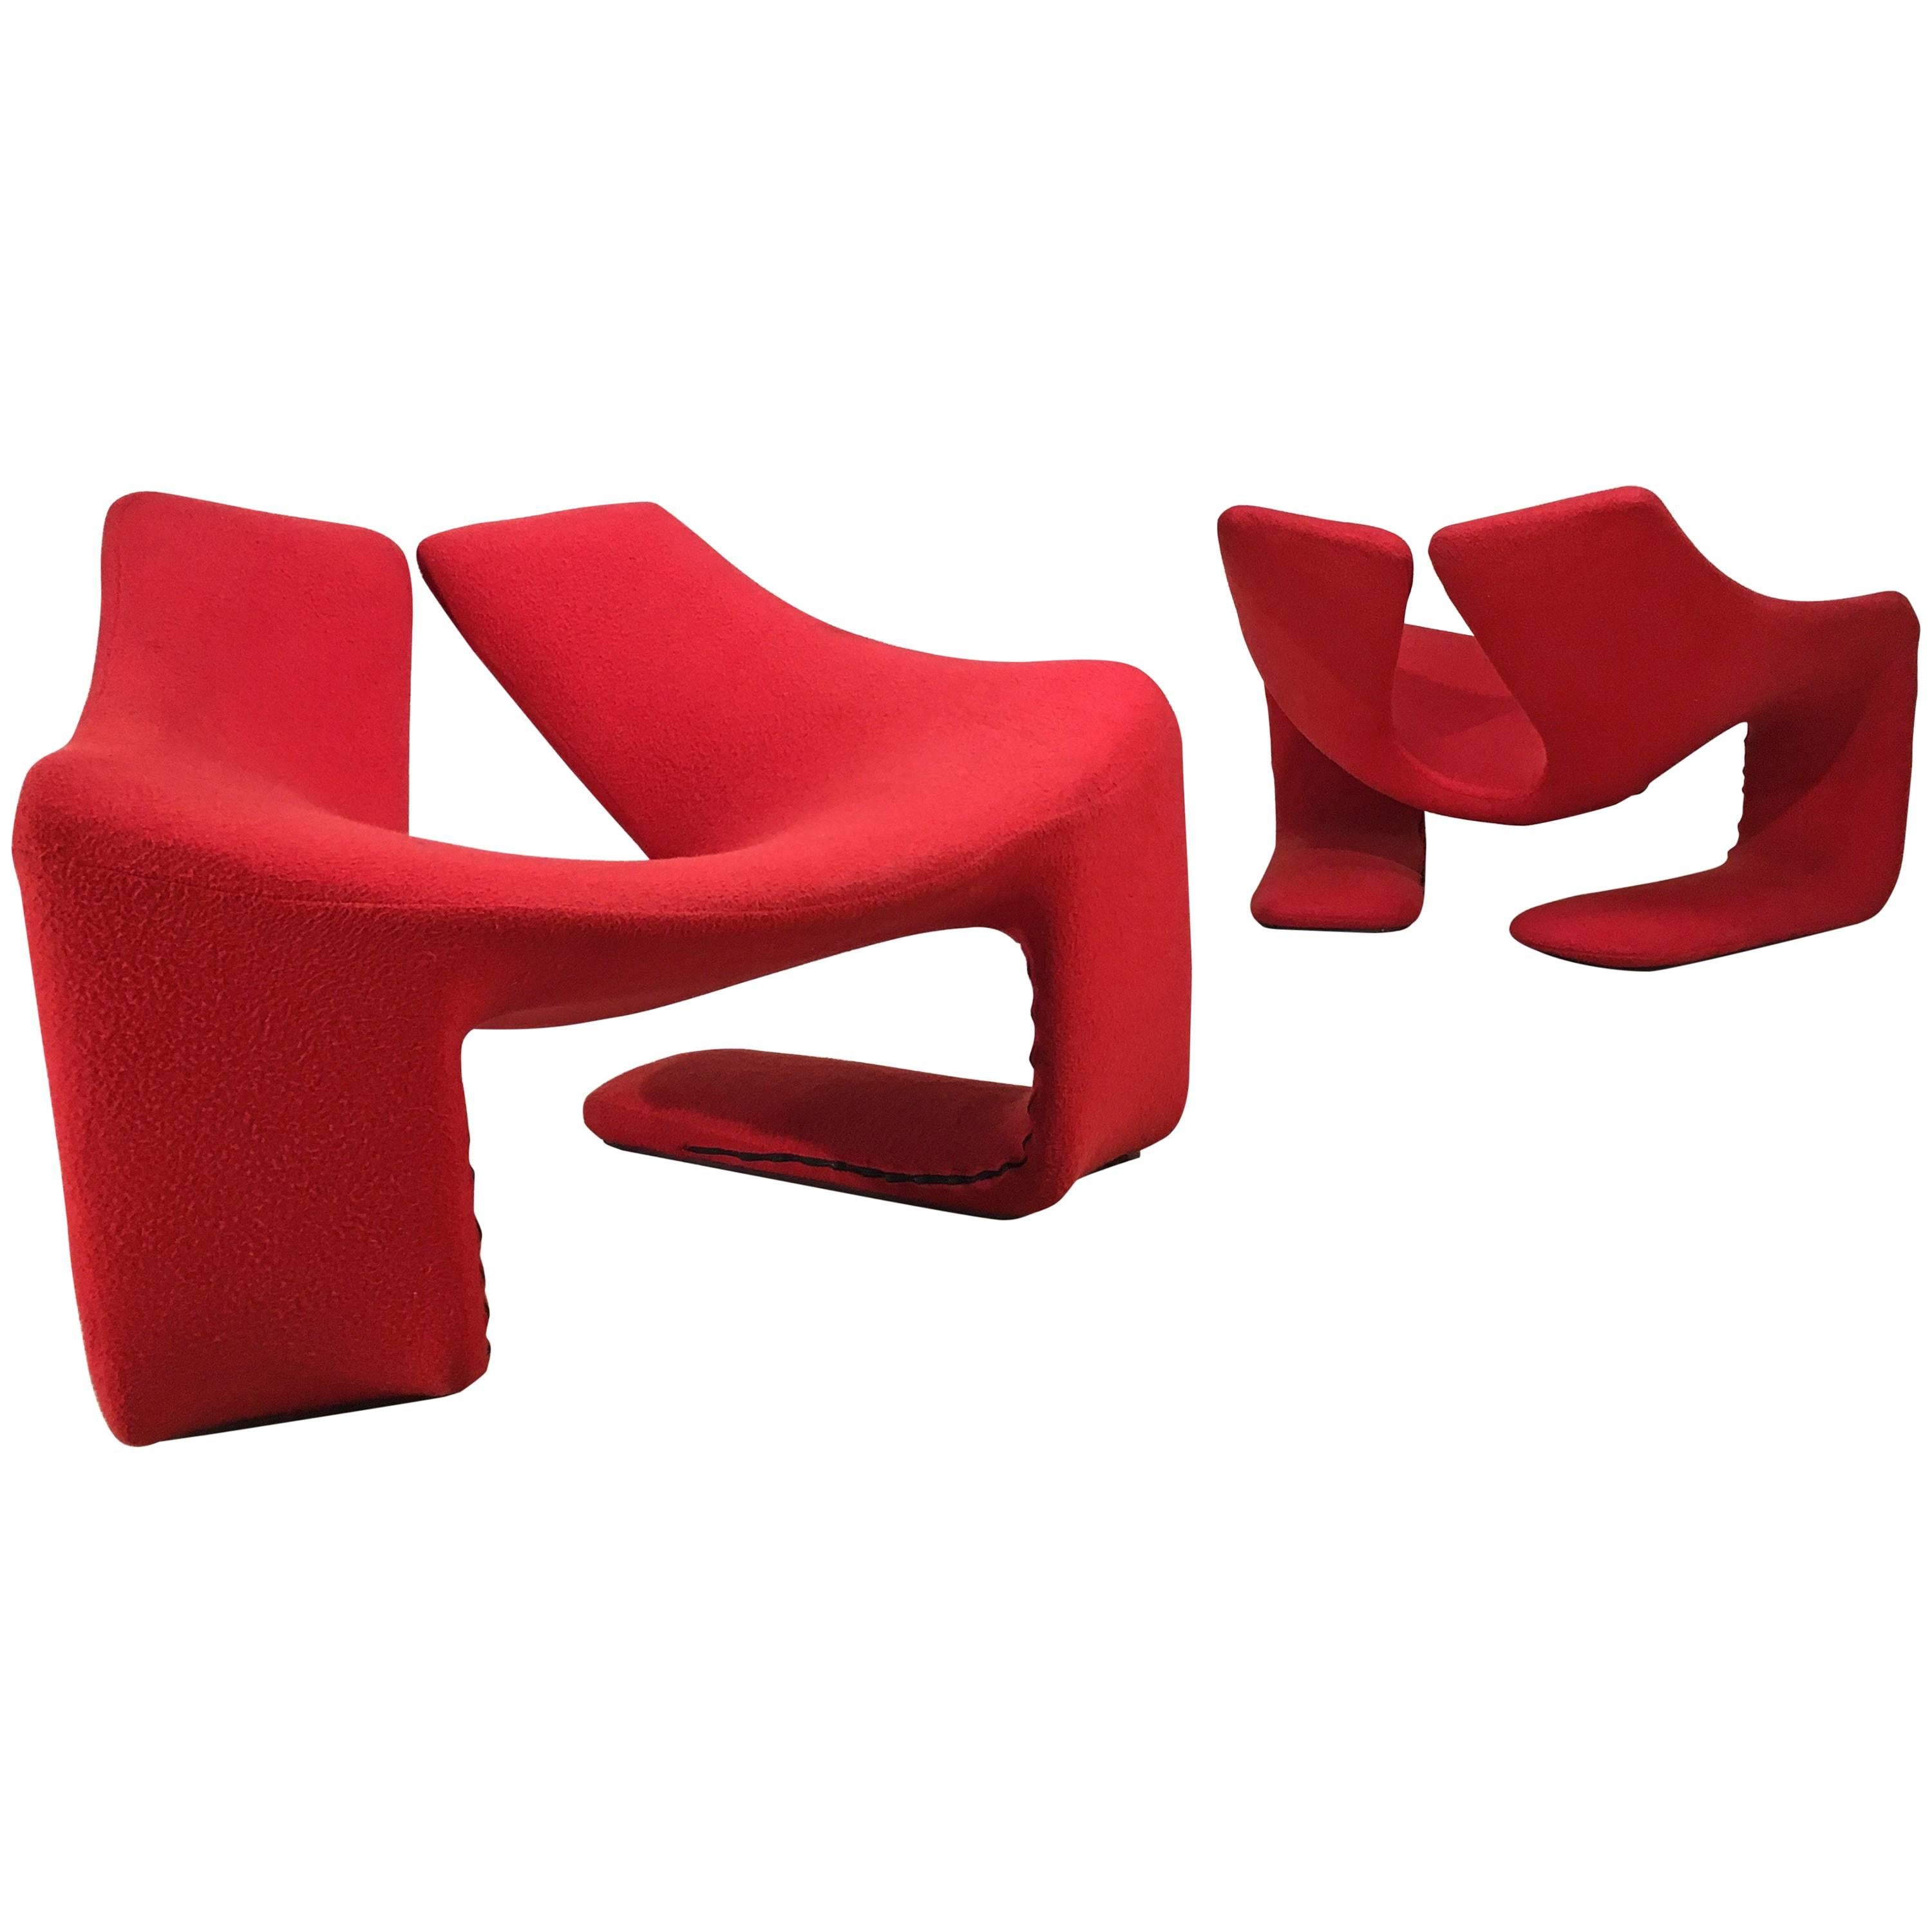 Pair of "Zen" Lounge Chairs by Kwok Hoi Chan for Steiner Paris